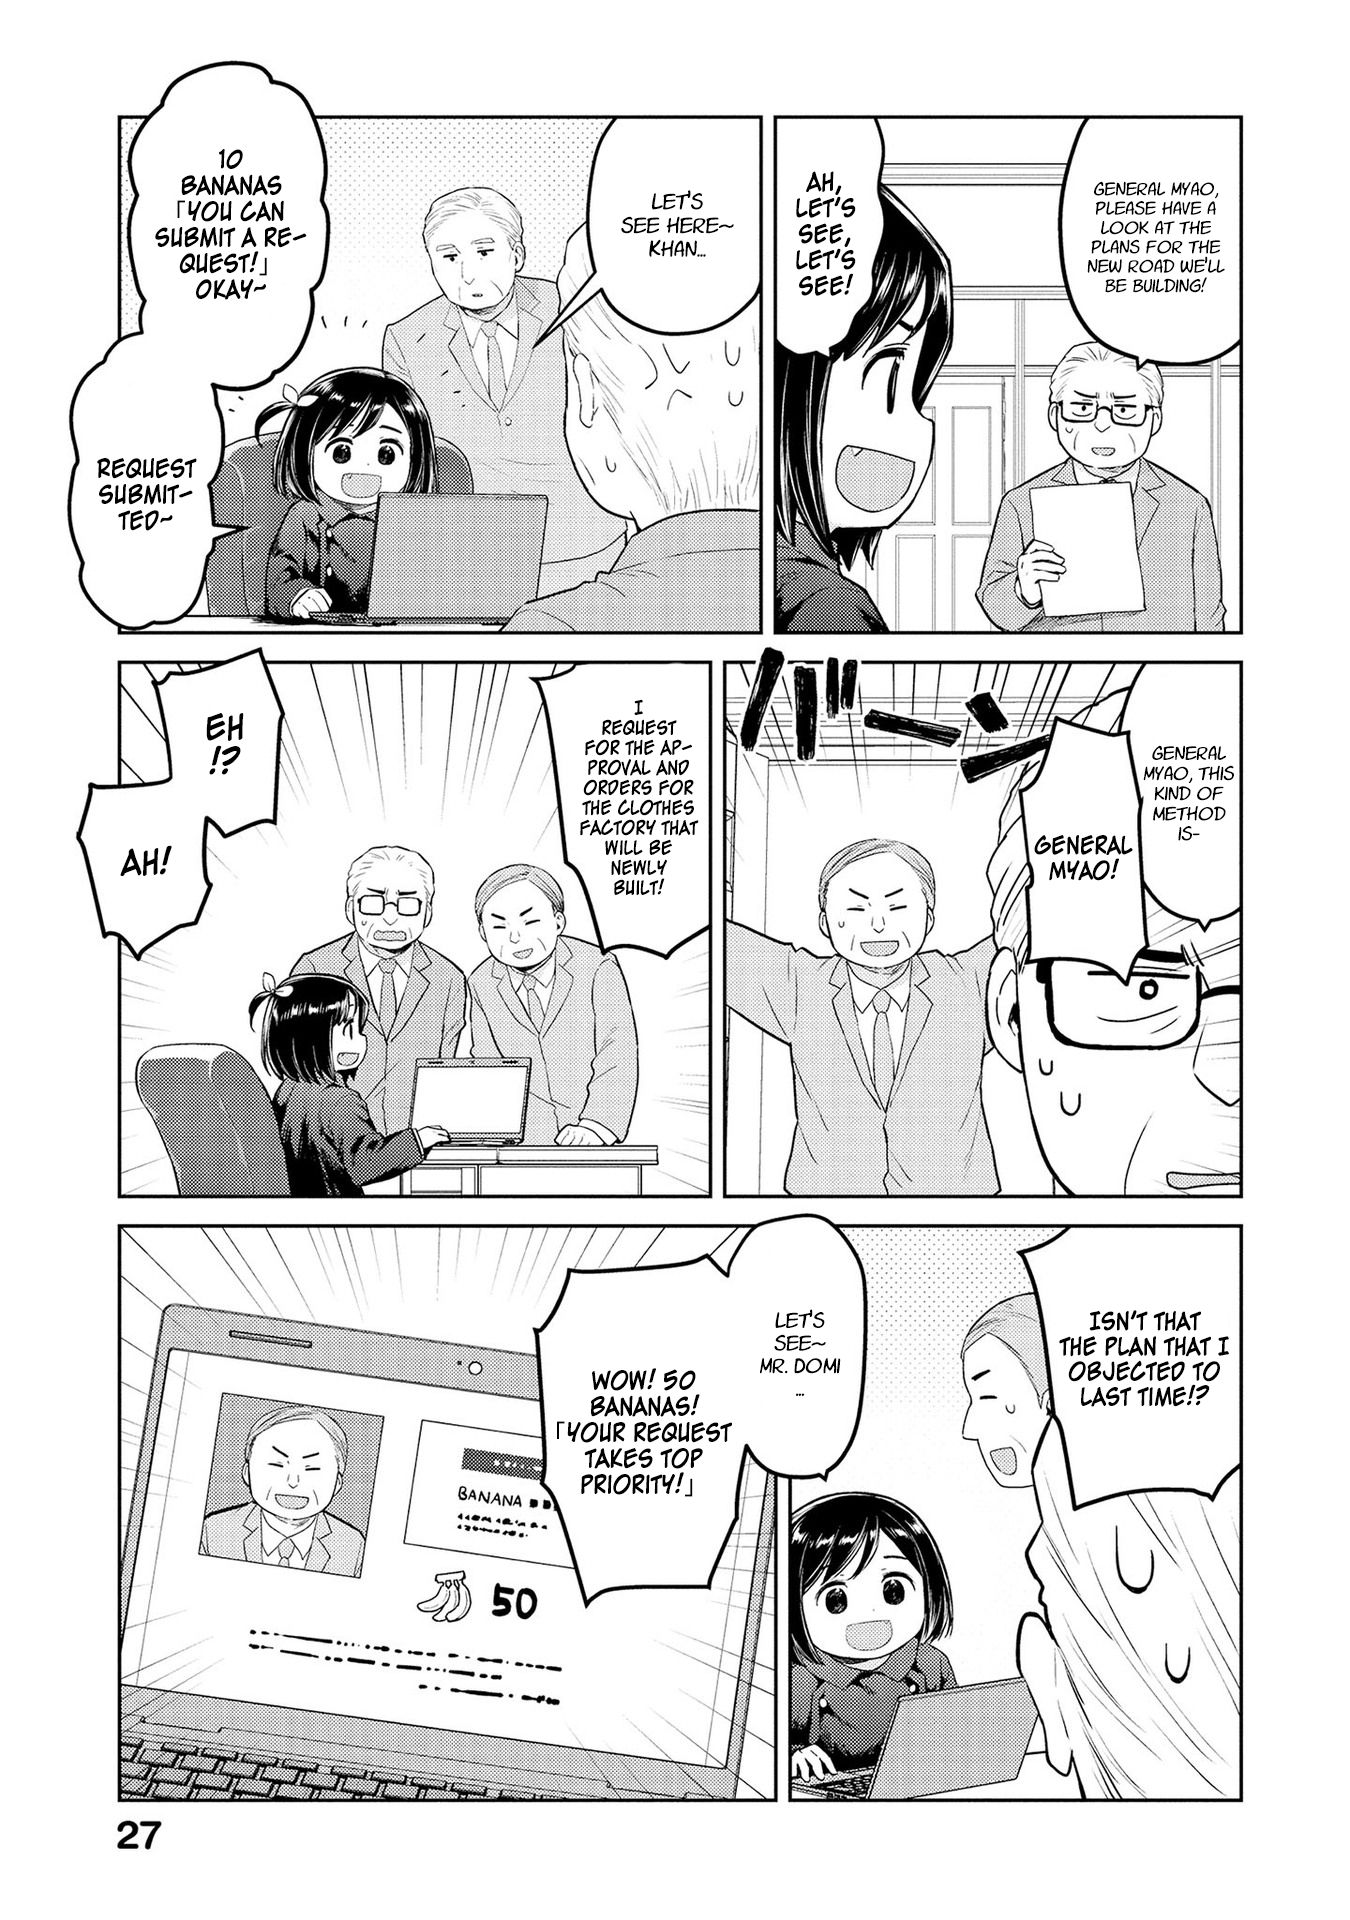 Oh, Our General Myao - chapter 27 - #5